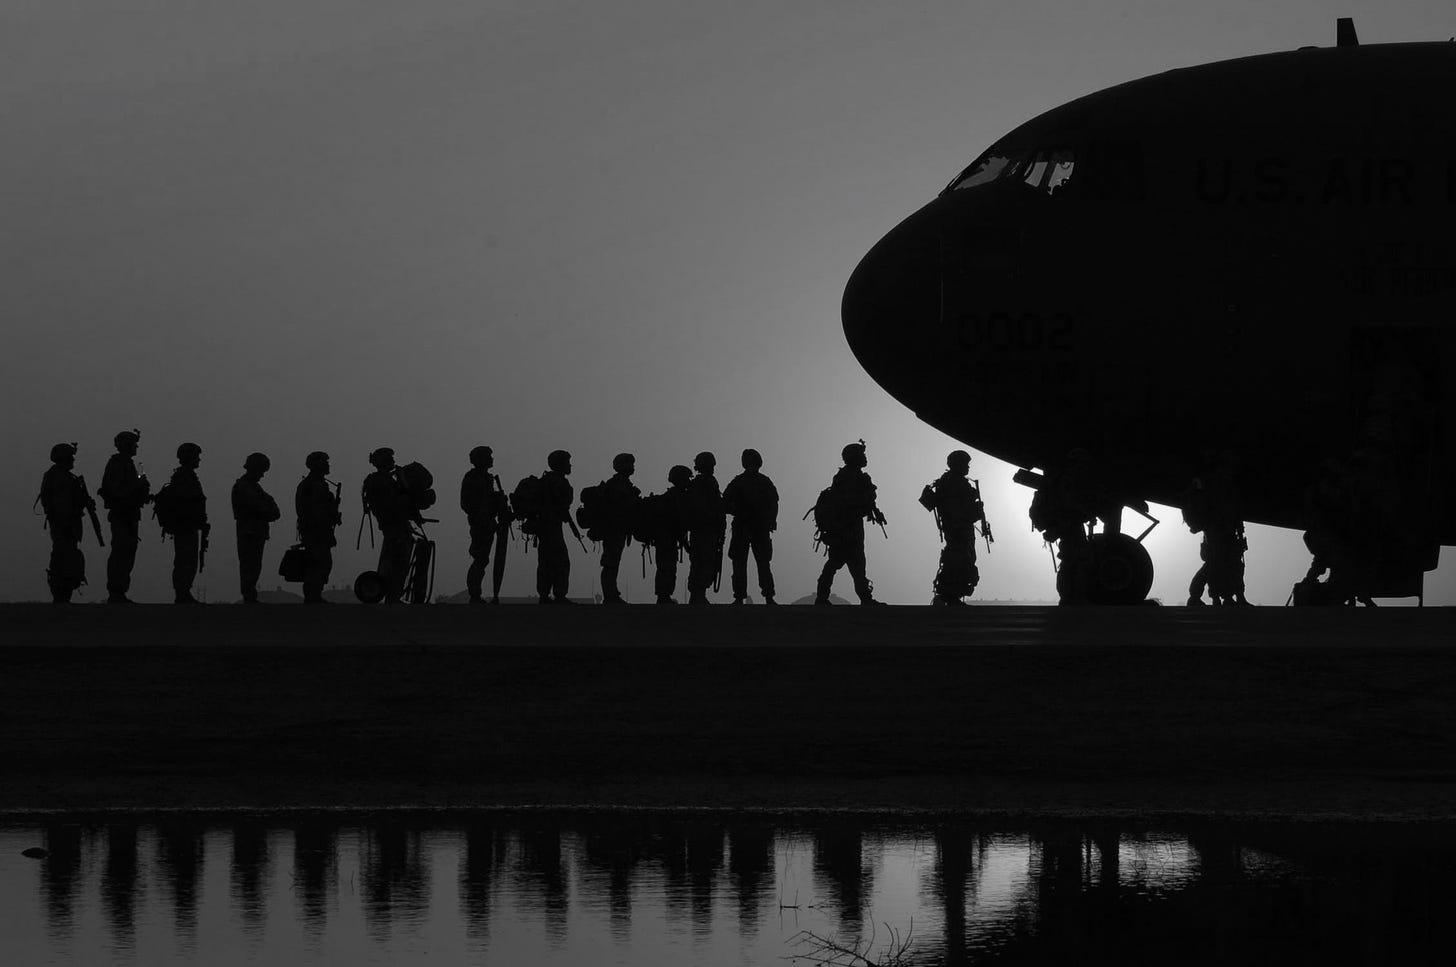 At dusk or dawn, the silhouettes of soldiers lined up to board a jet